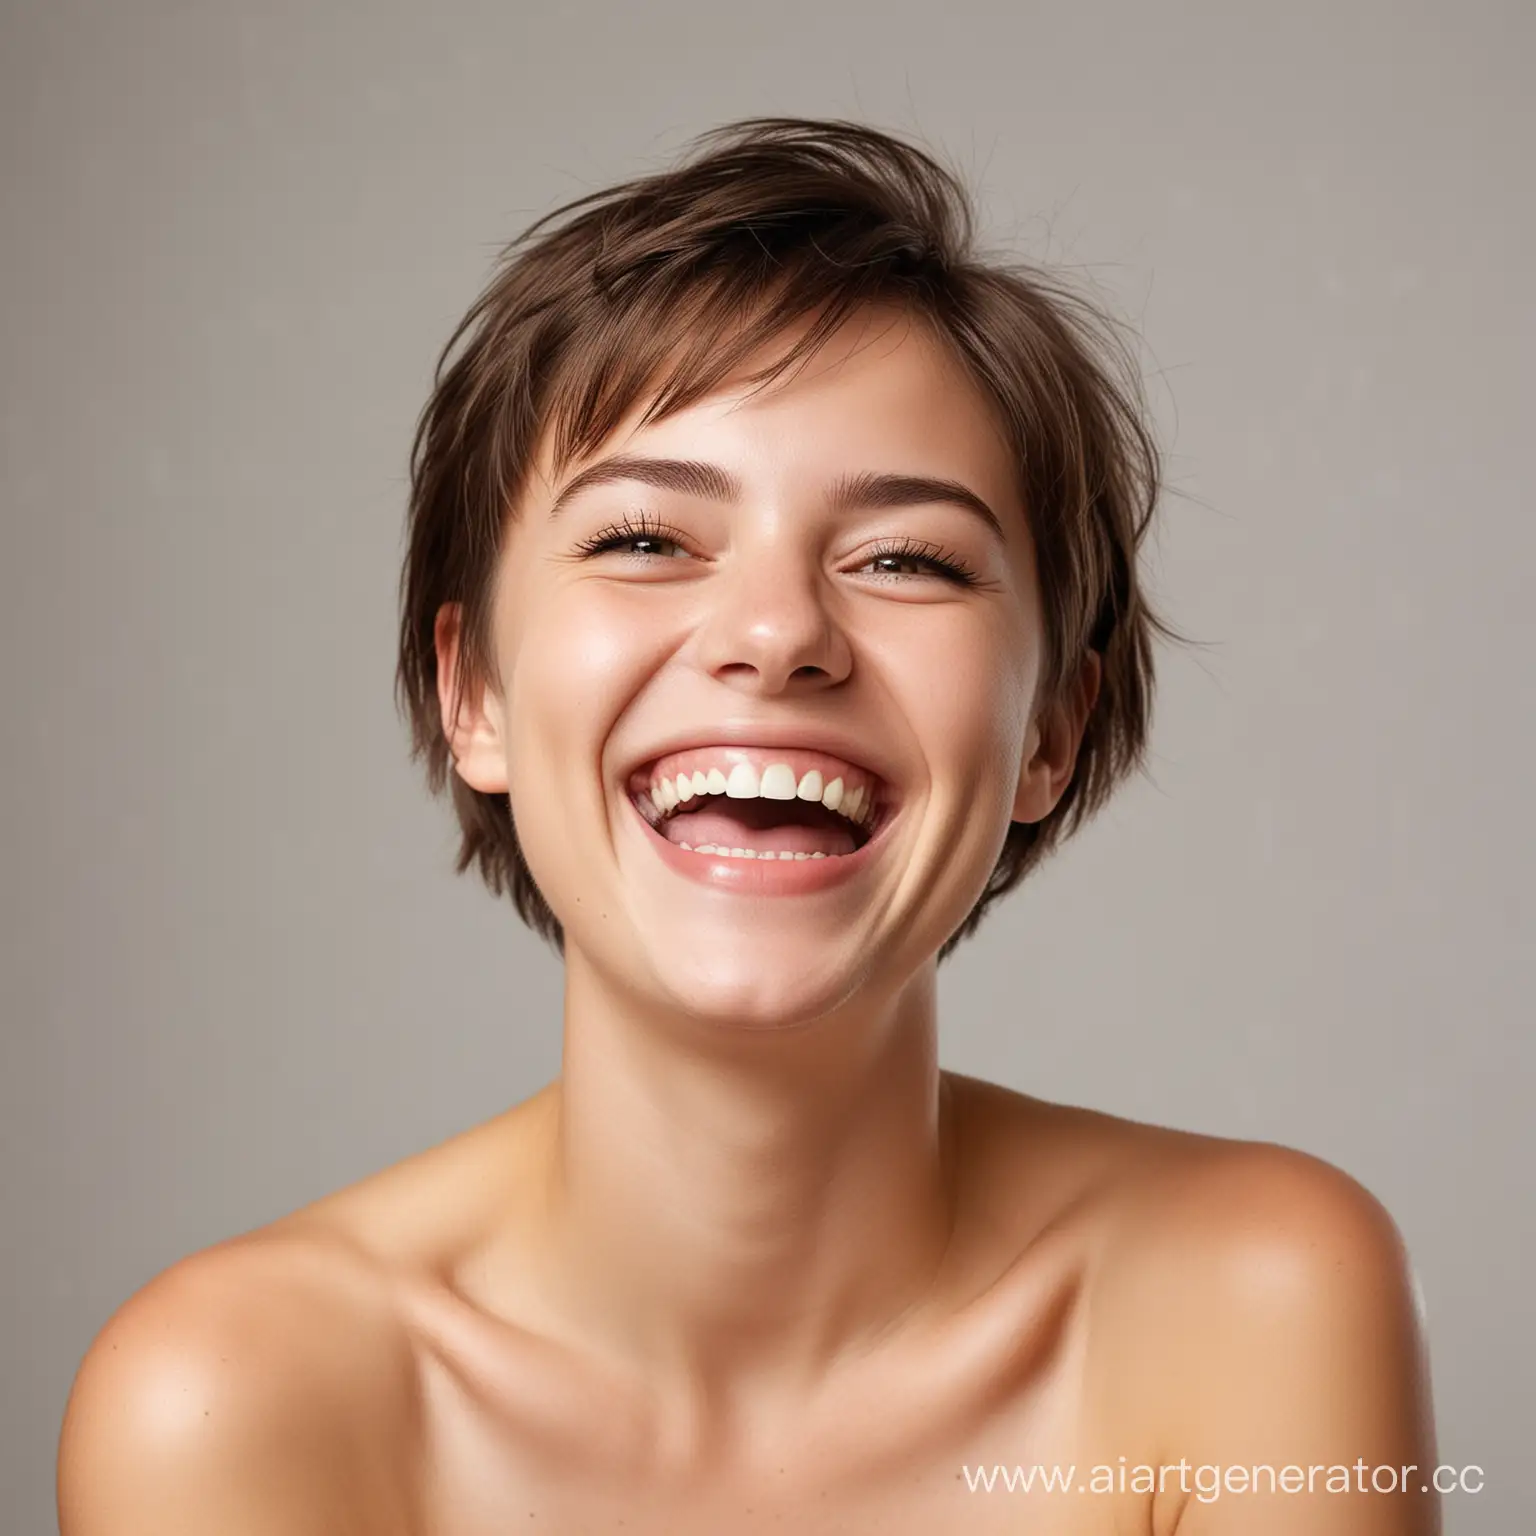 Joyful-Young-Girl-Laughing-Freely-on-Bright-Background